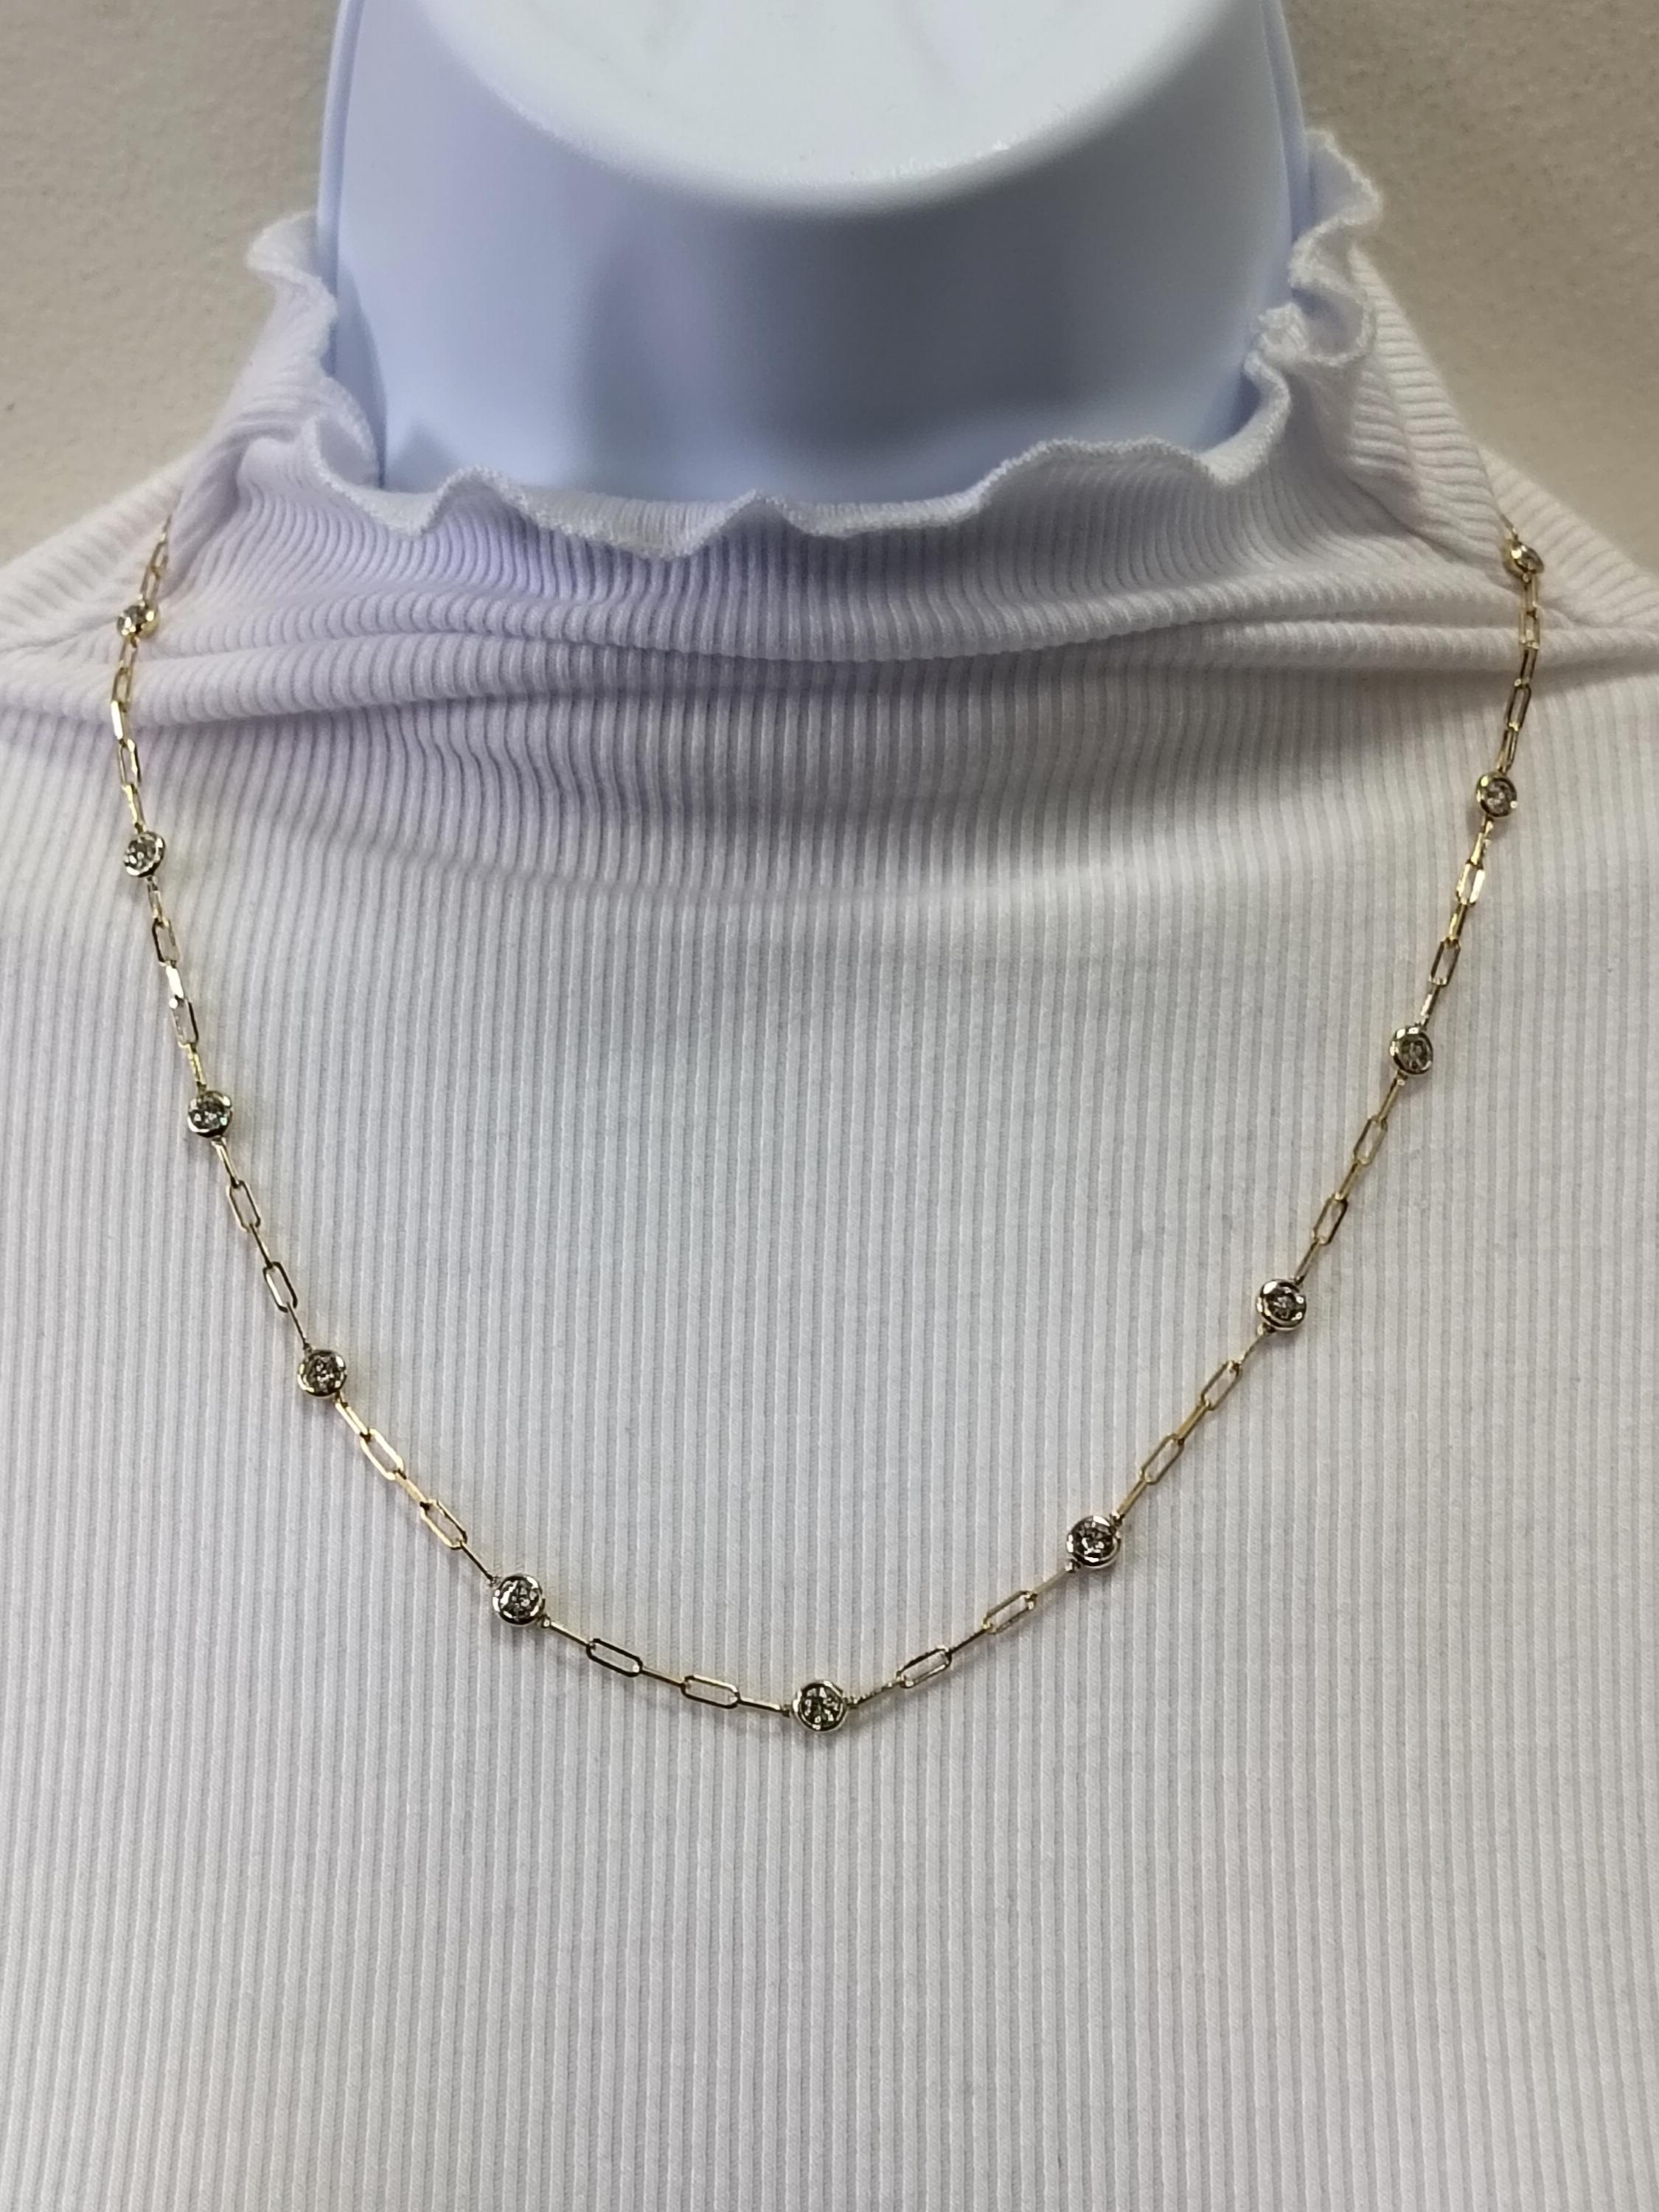 Beautiful paperclip necklace with 2.00 ct. good quality white diamond rounds.  Handmade in 14k yellow gold.  Length is 20